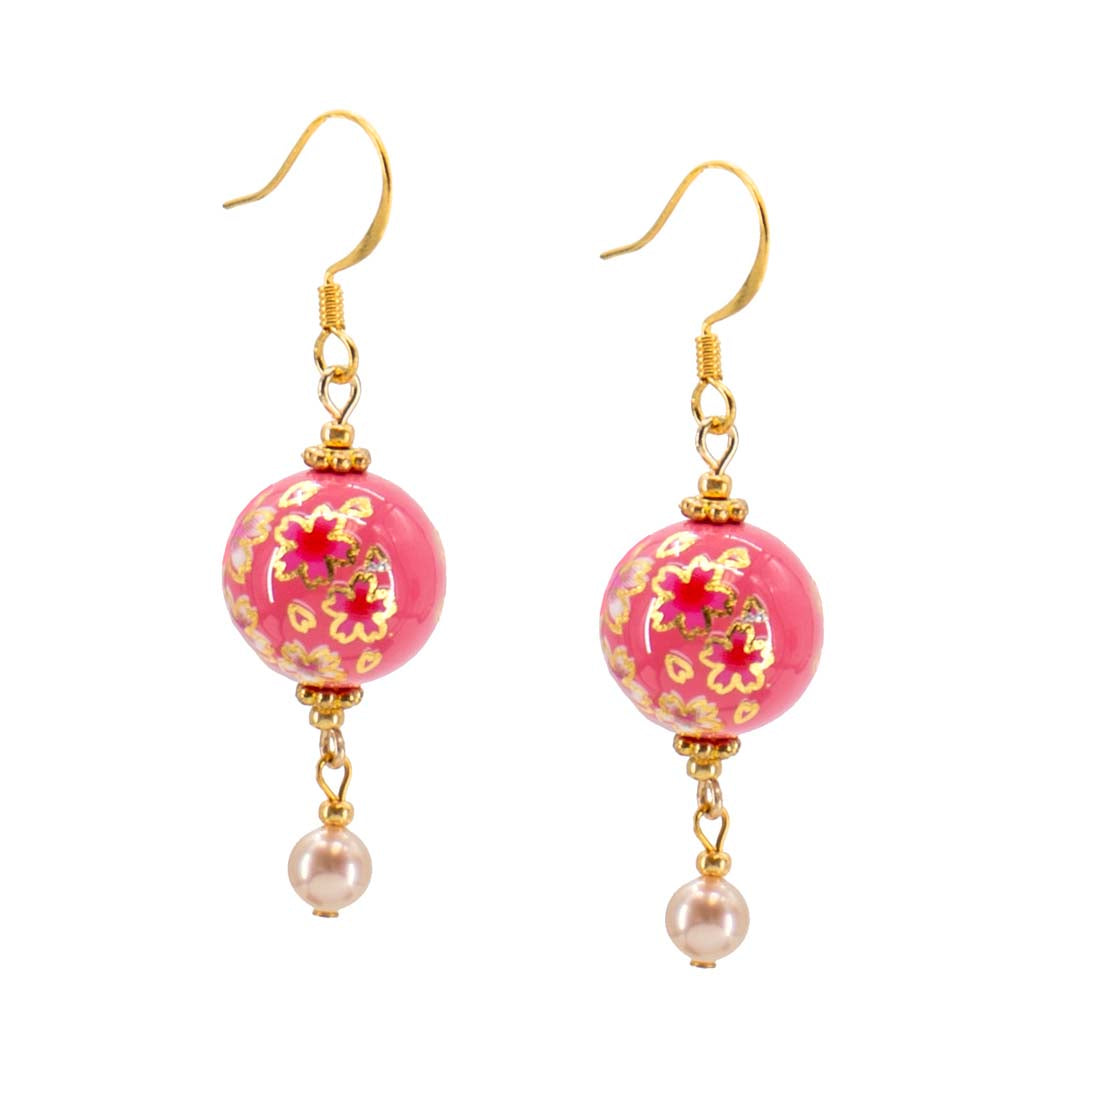 Cherry Blossom with Cultured Pearls Tensha Bead Earrings